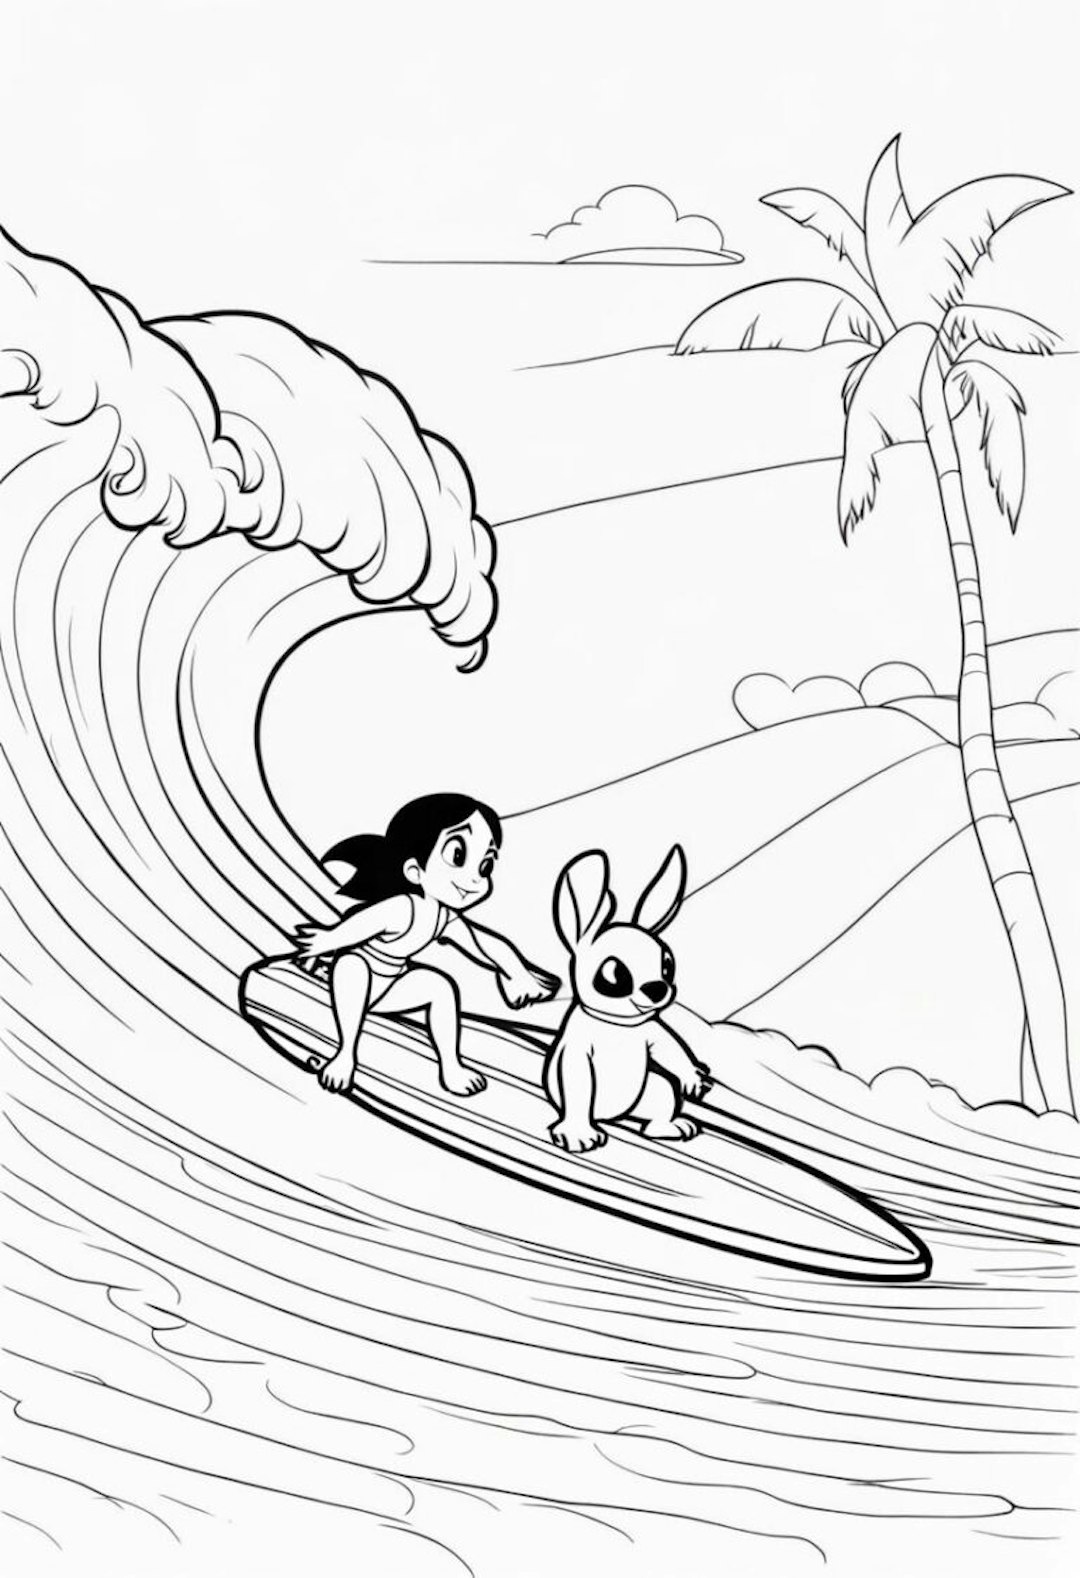 Lilo and Stitch Surfing Adventure coloring pages